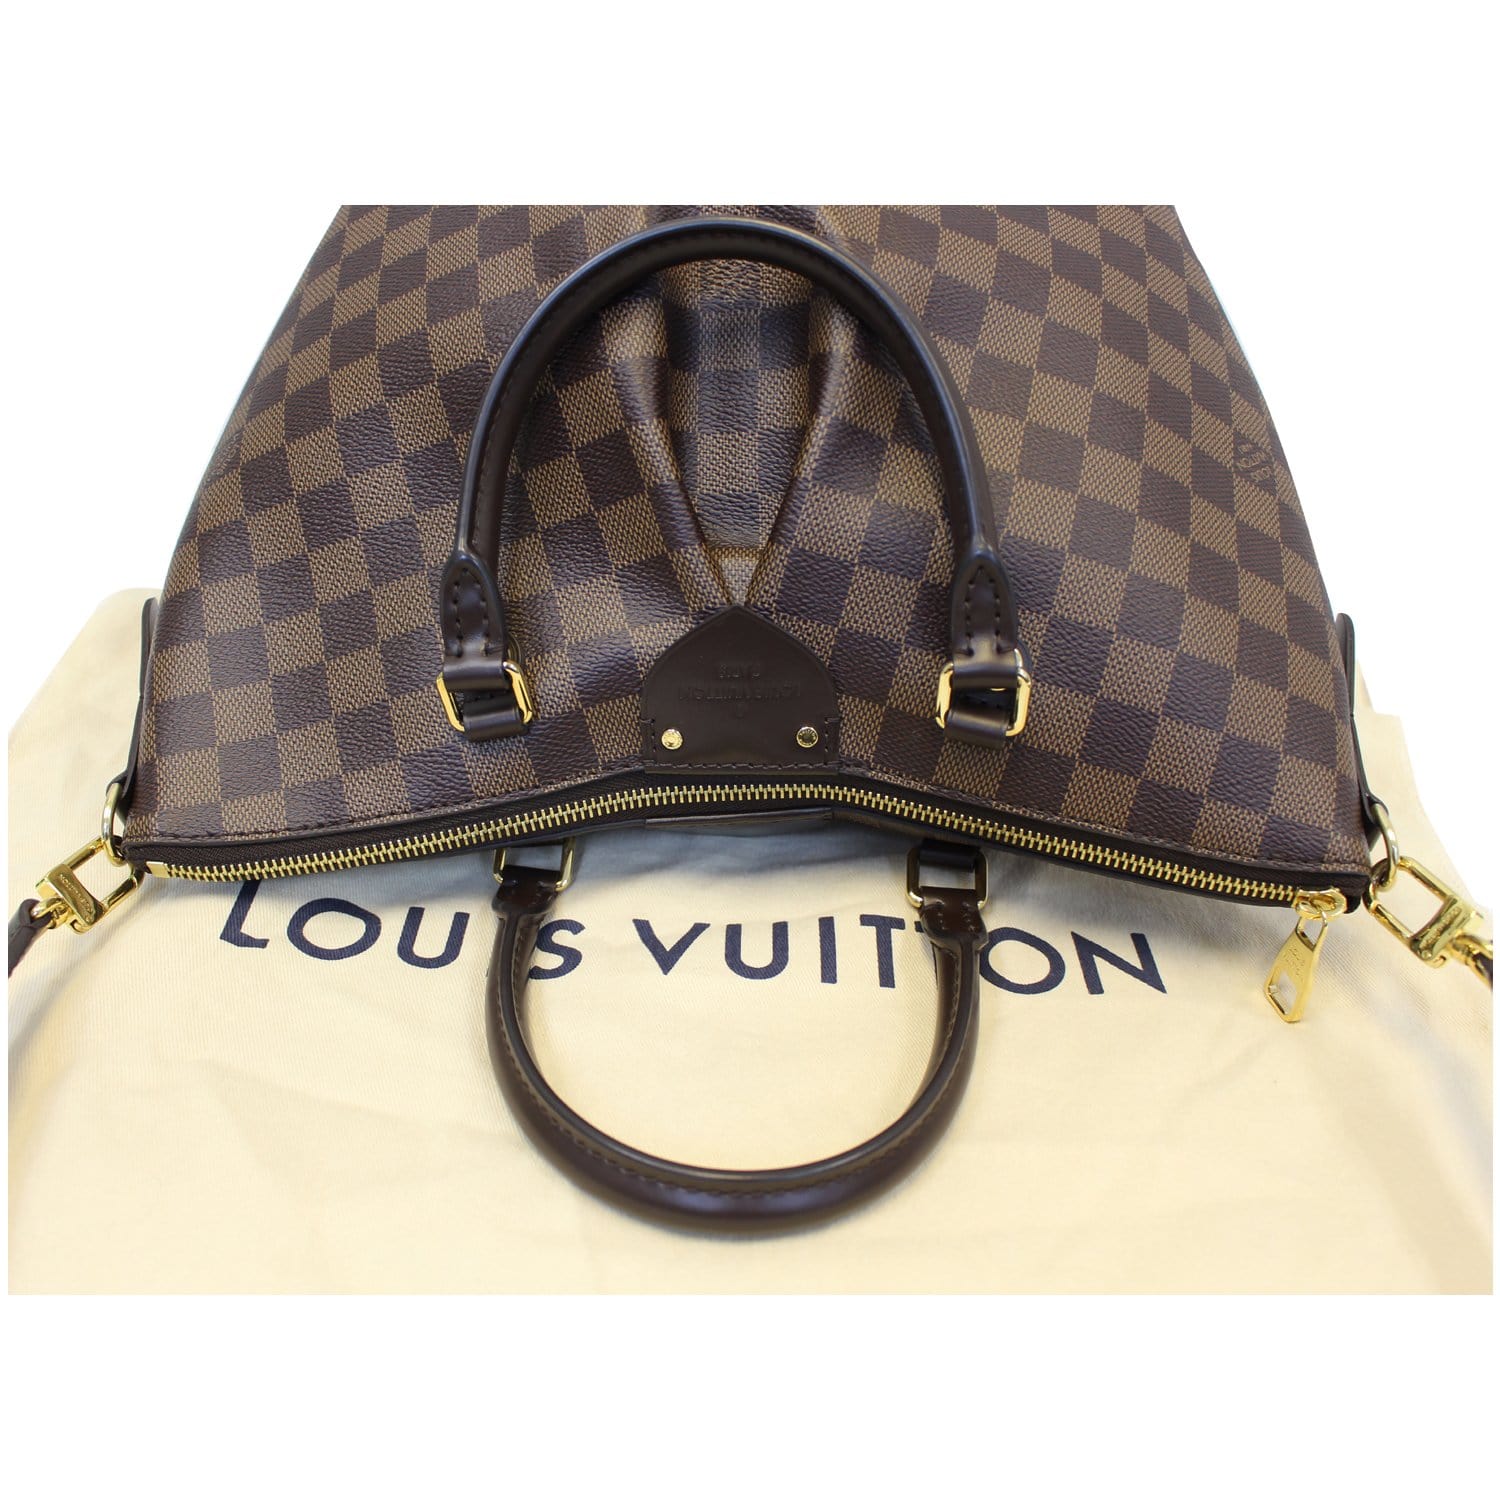 Siena leather handbag Louis Vuitton Brown in Leather - 38416971